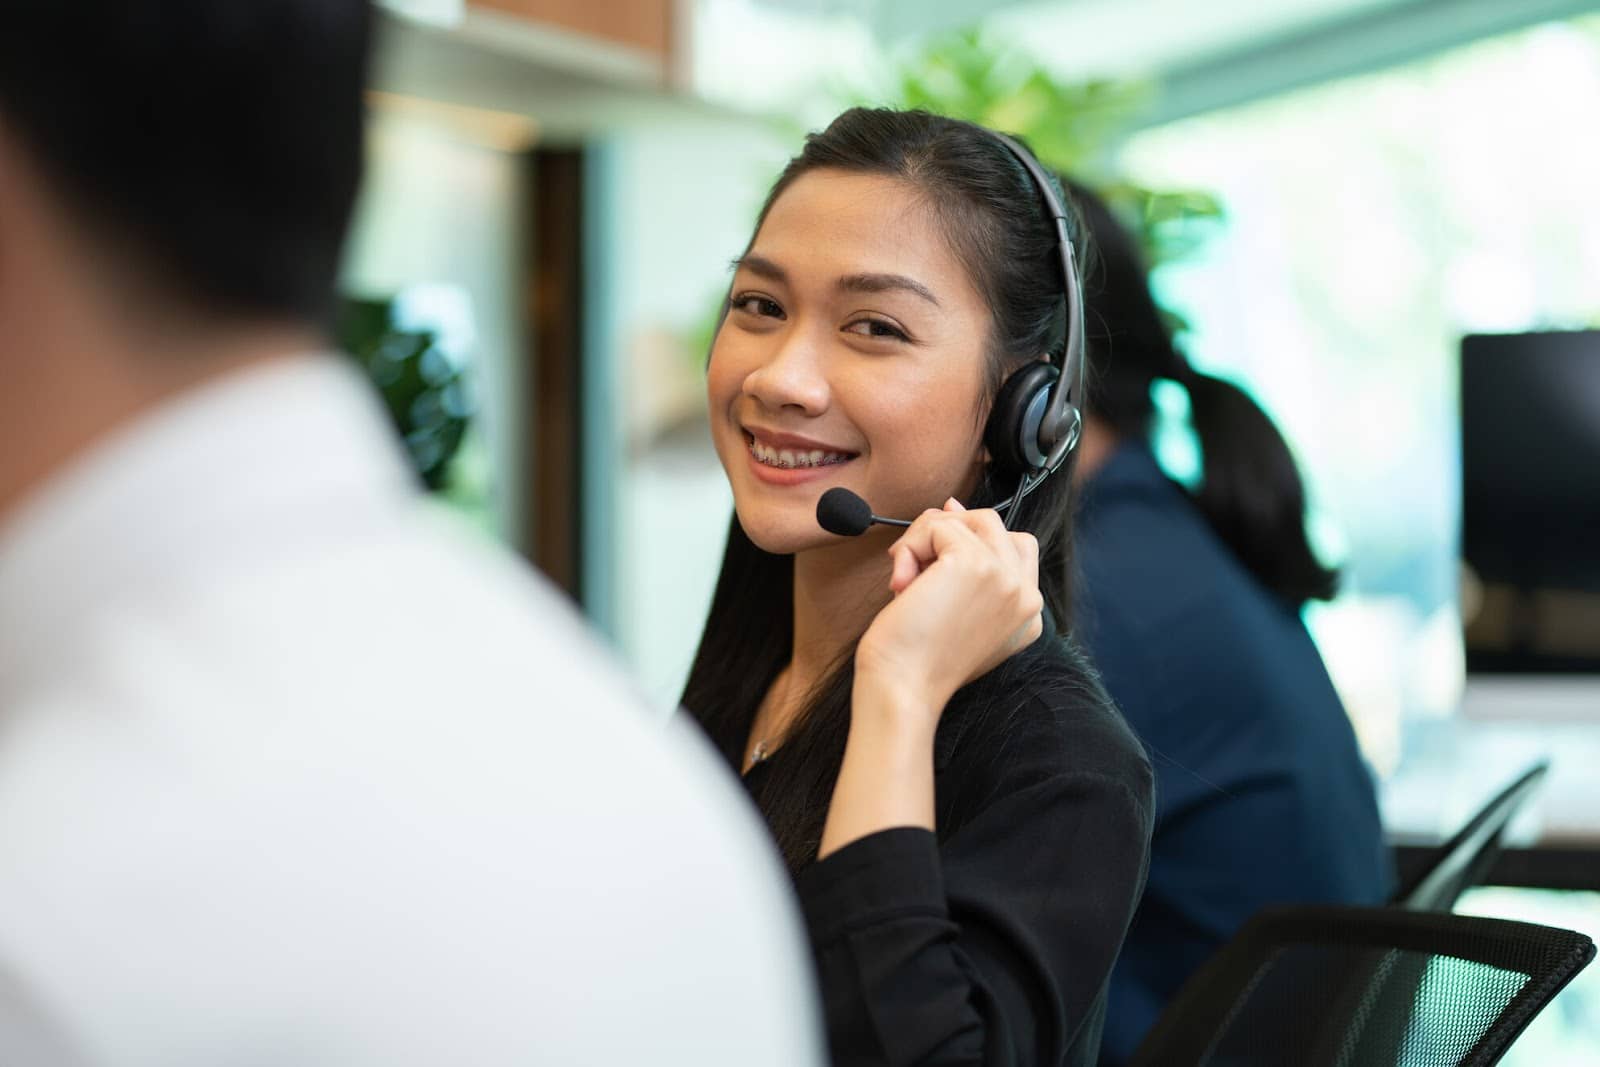 What are the Advantages and Disadvantages of Telemarketing